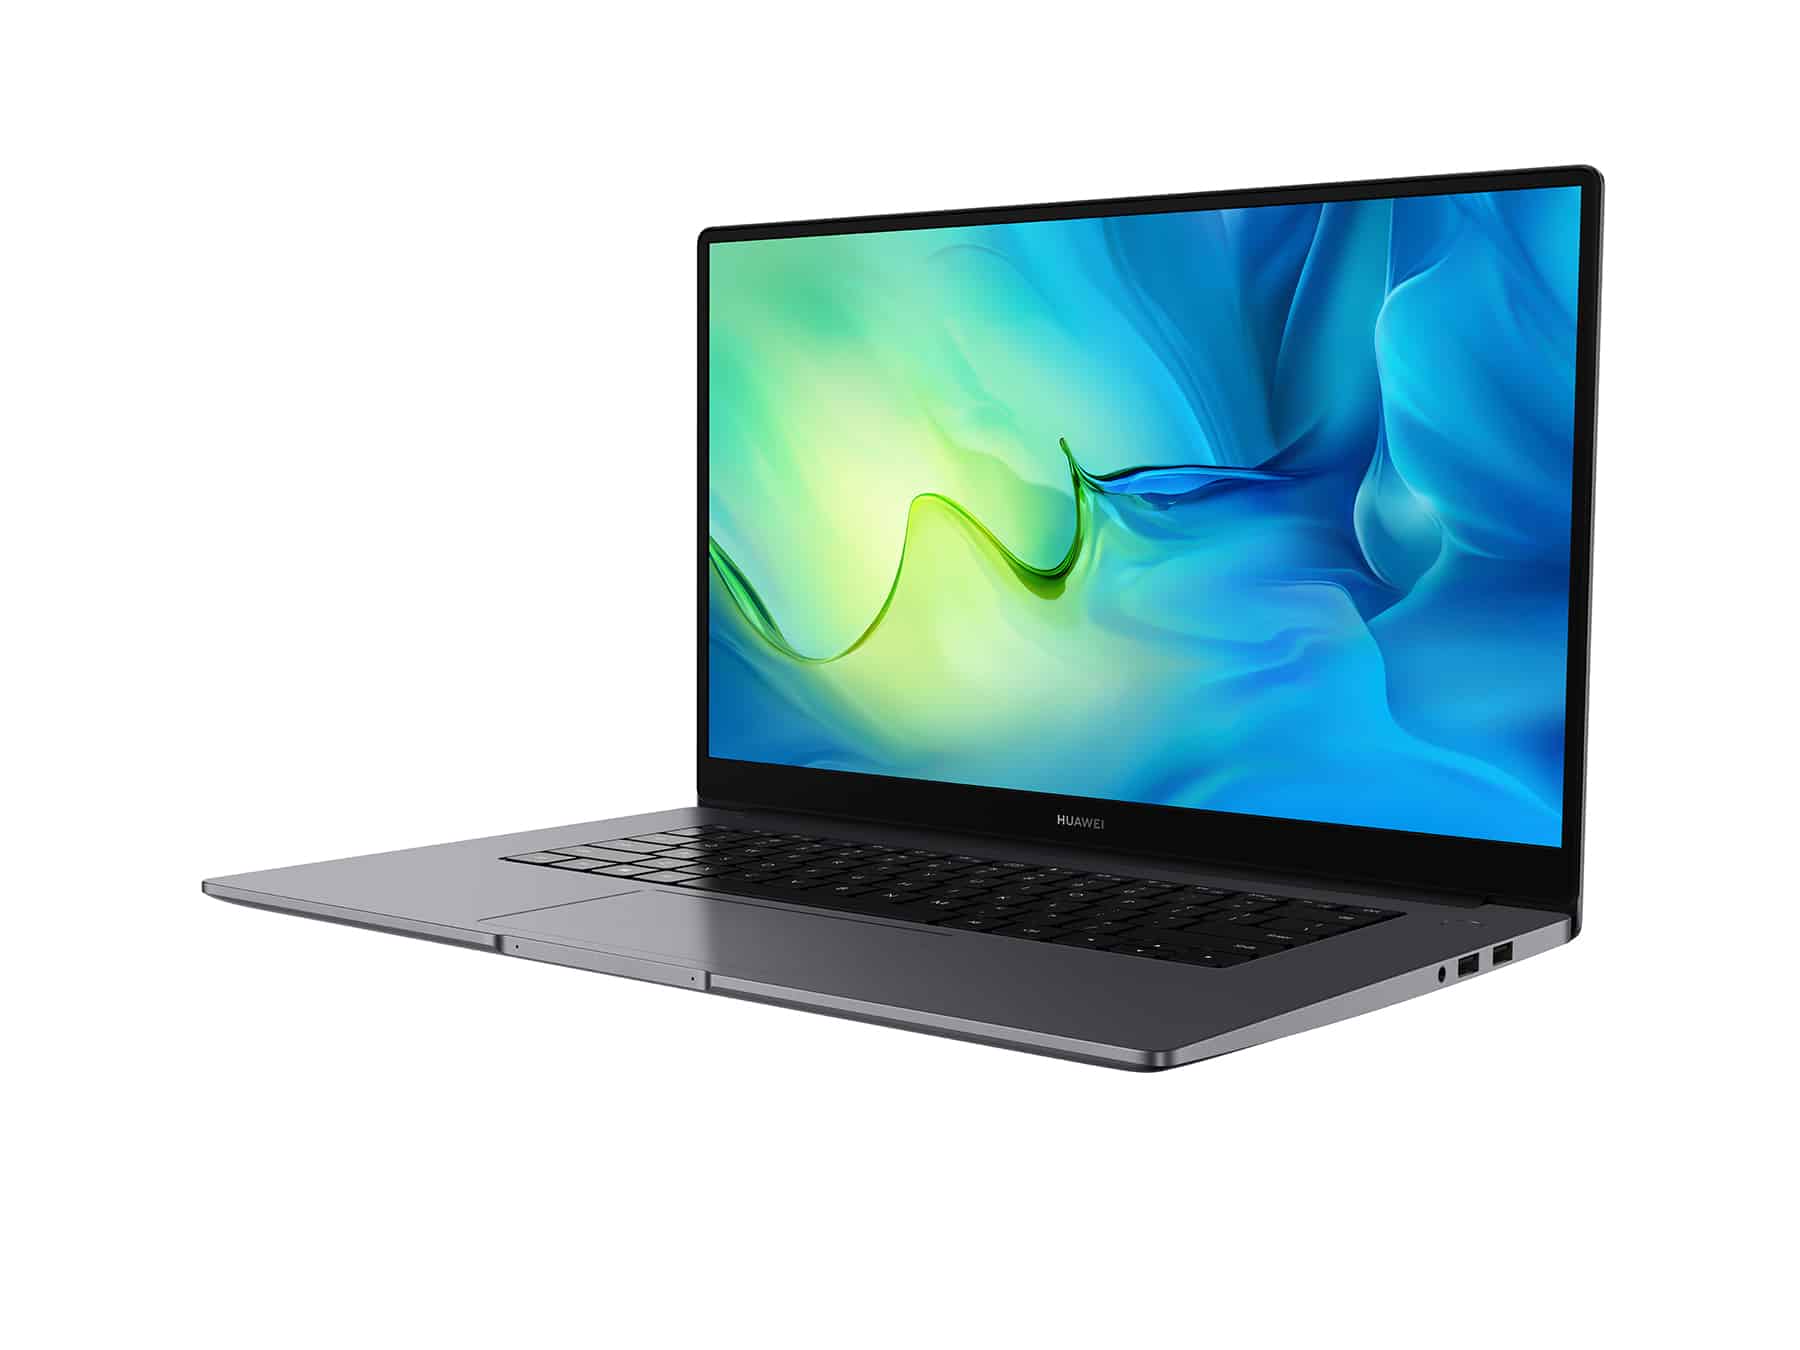 Huawei announces the New HUAWEI MateBook D 15 in the UAE